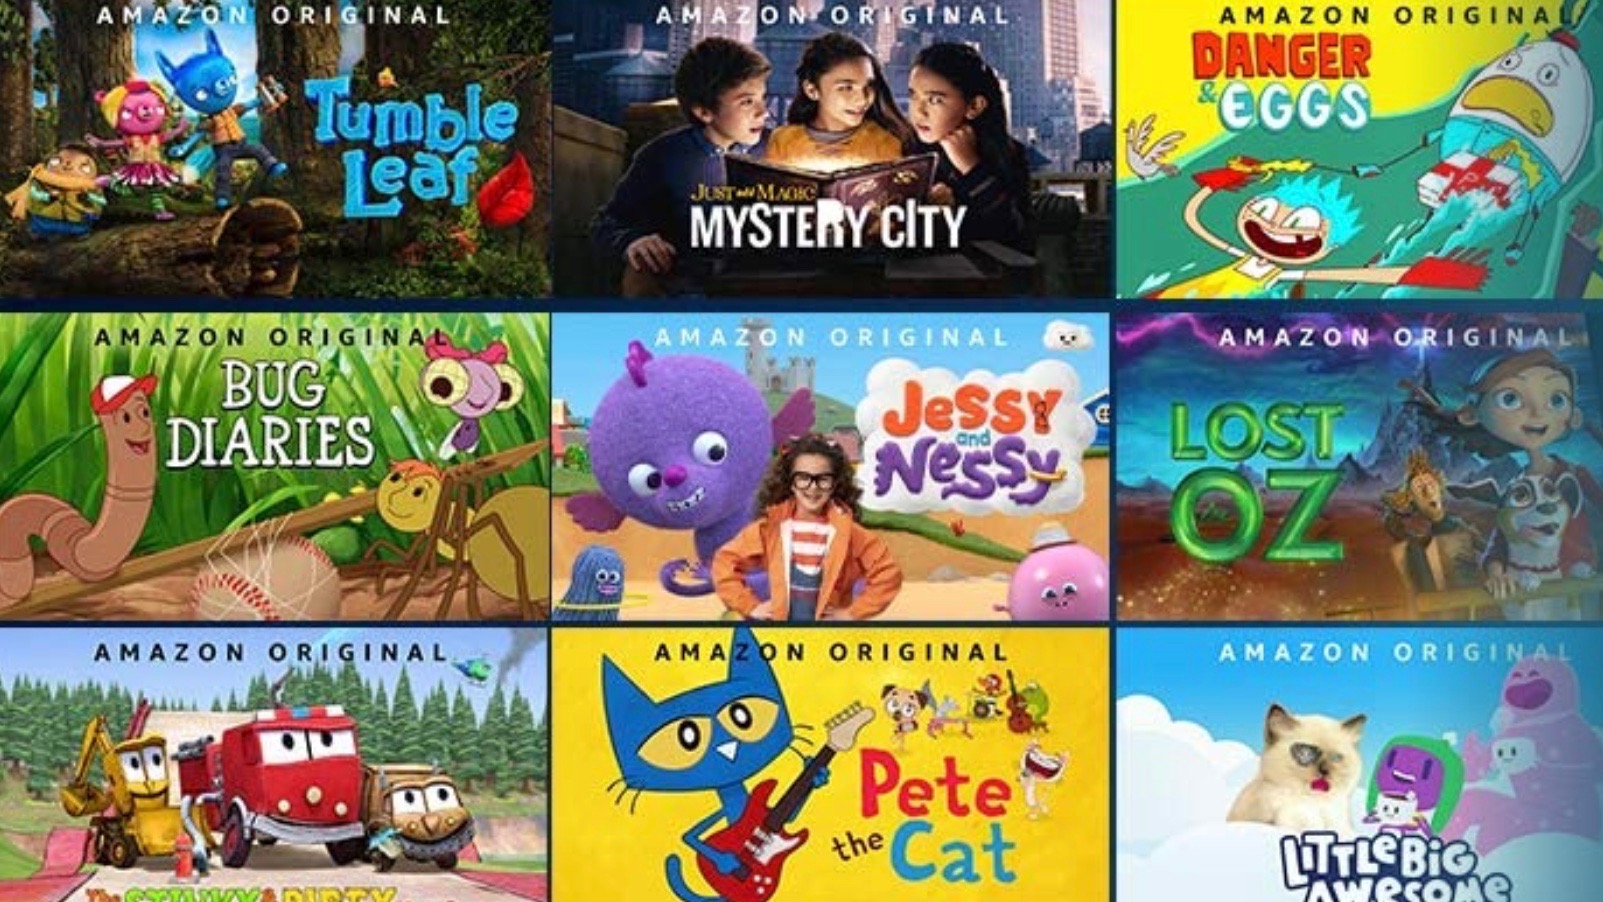 6 Pics Pbs Kids Shows And View - Alqu Blog A35